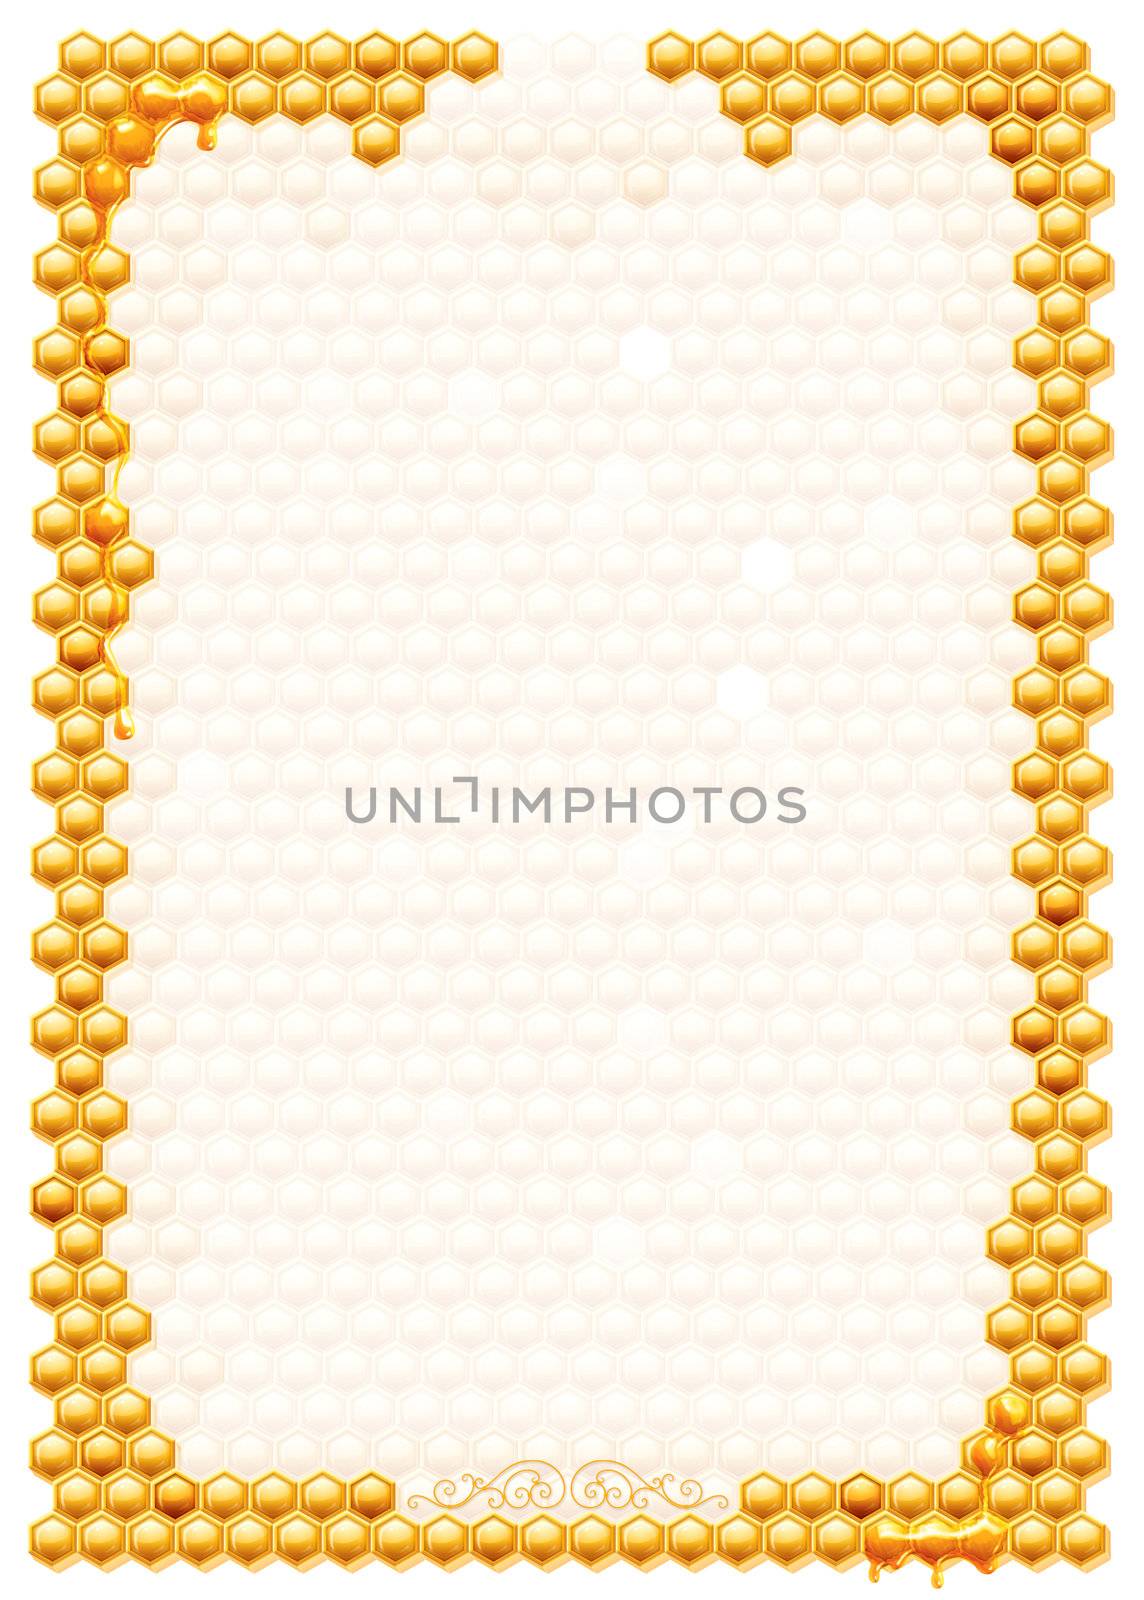 Frame with bee honeycombs isolated on a white background